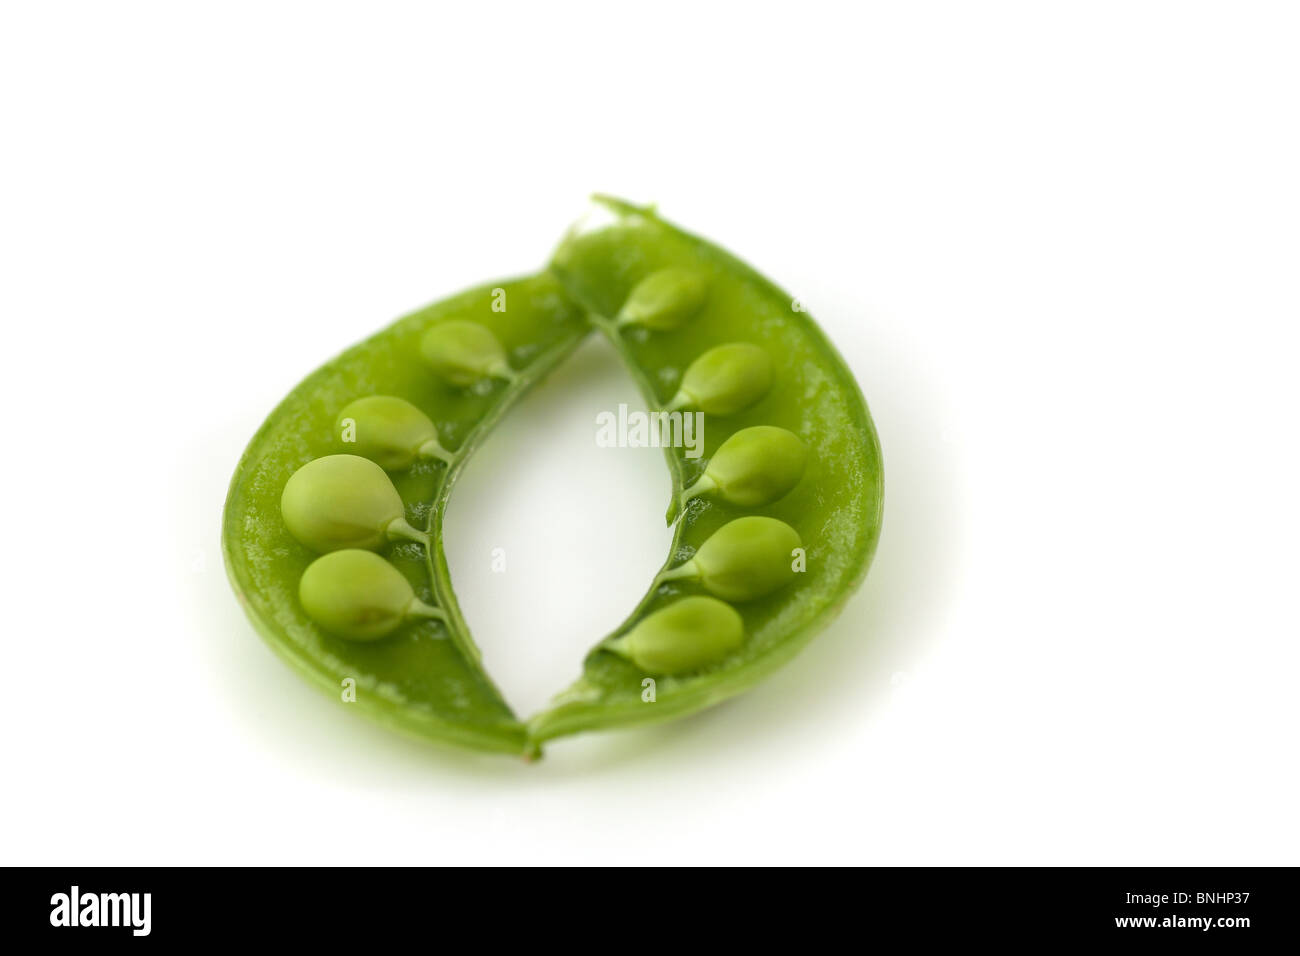 Peas in a pod on a white background Stock Photo